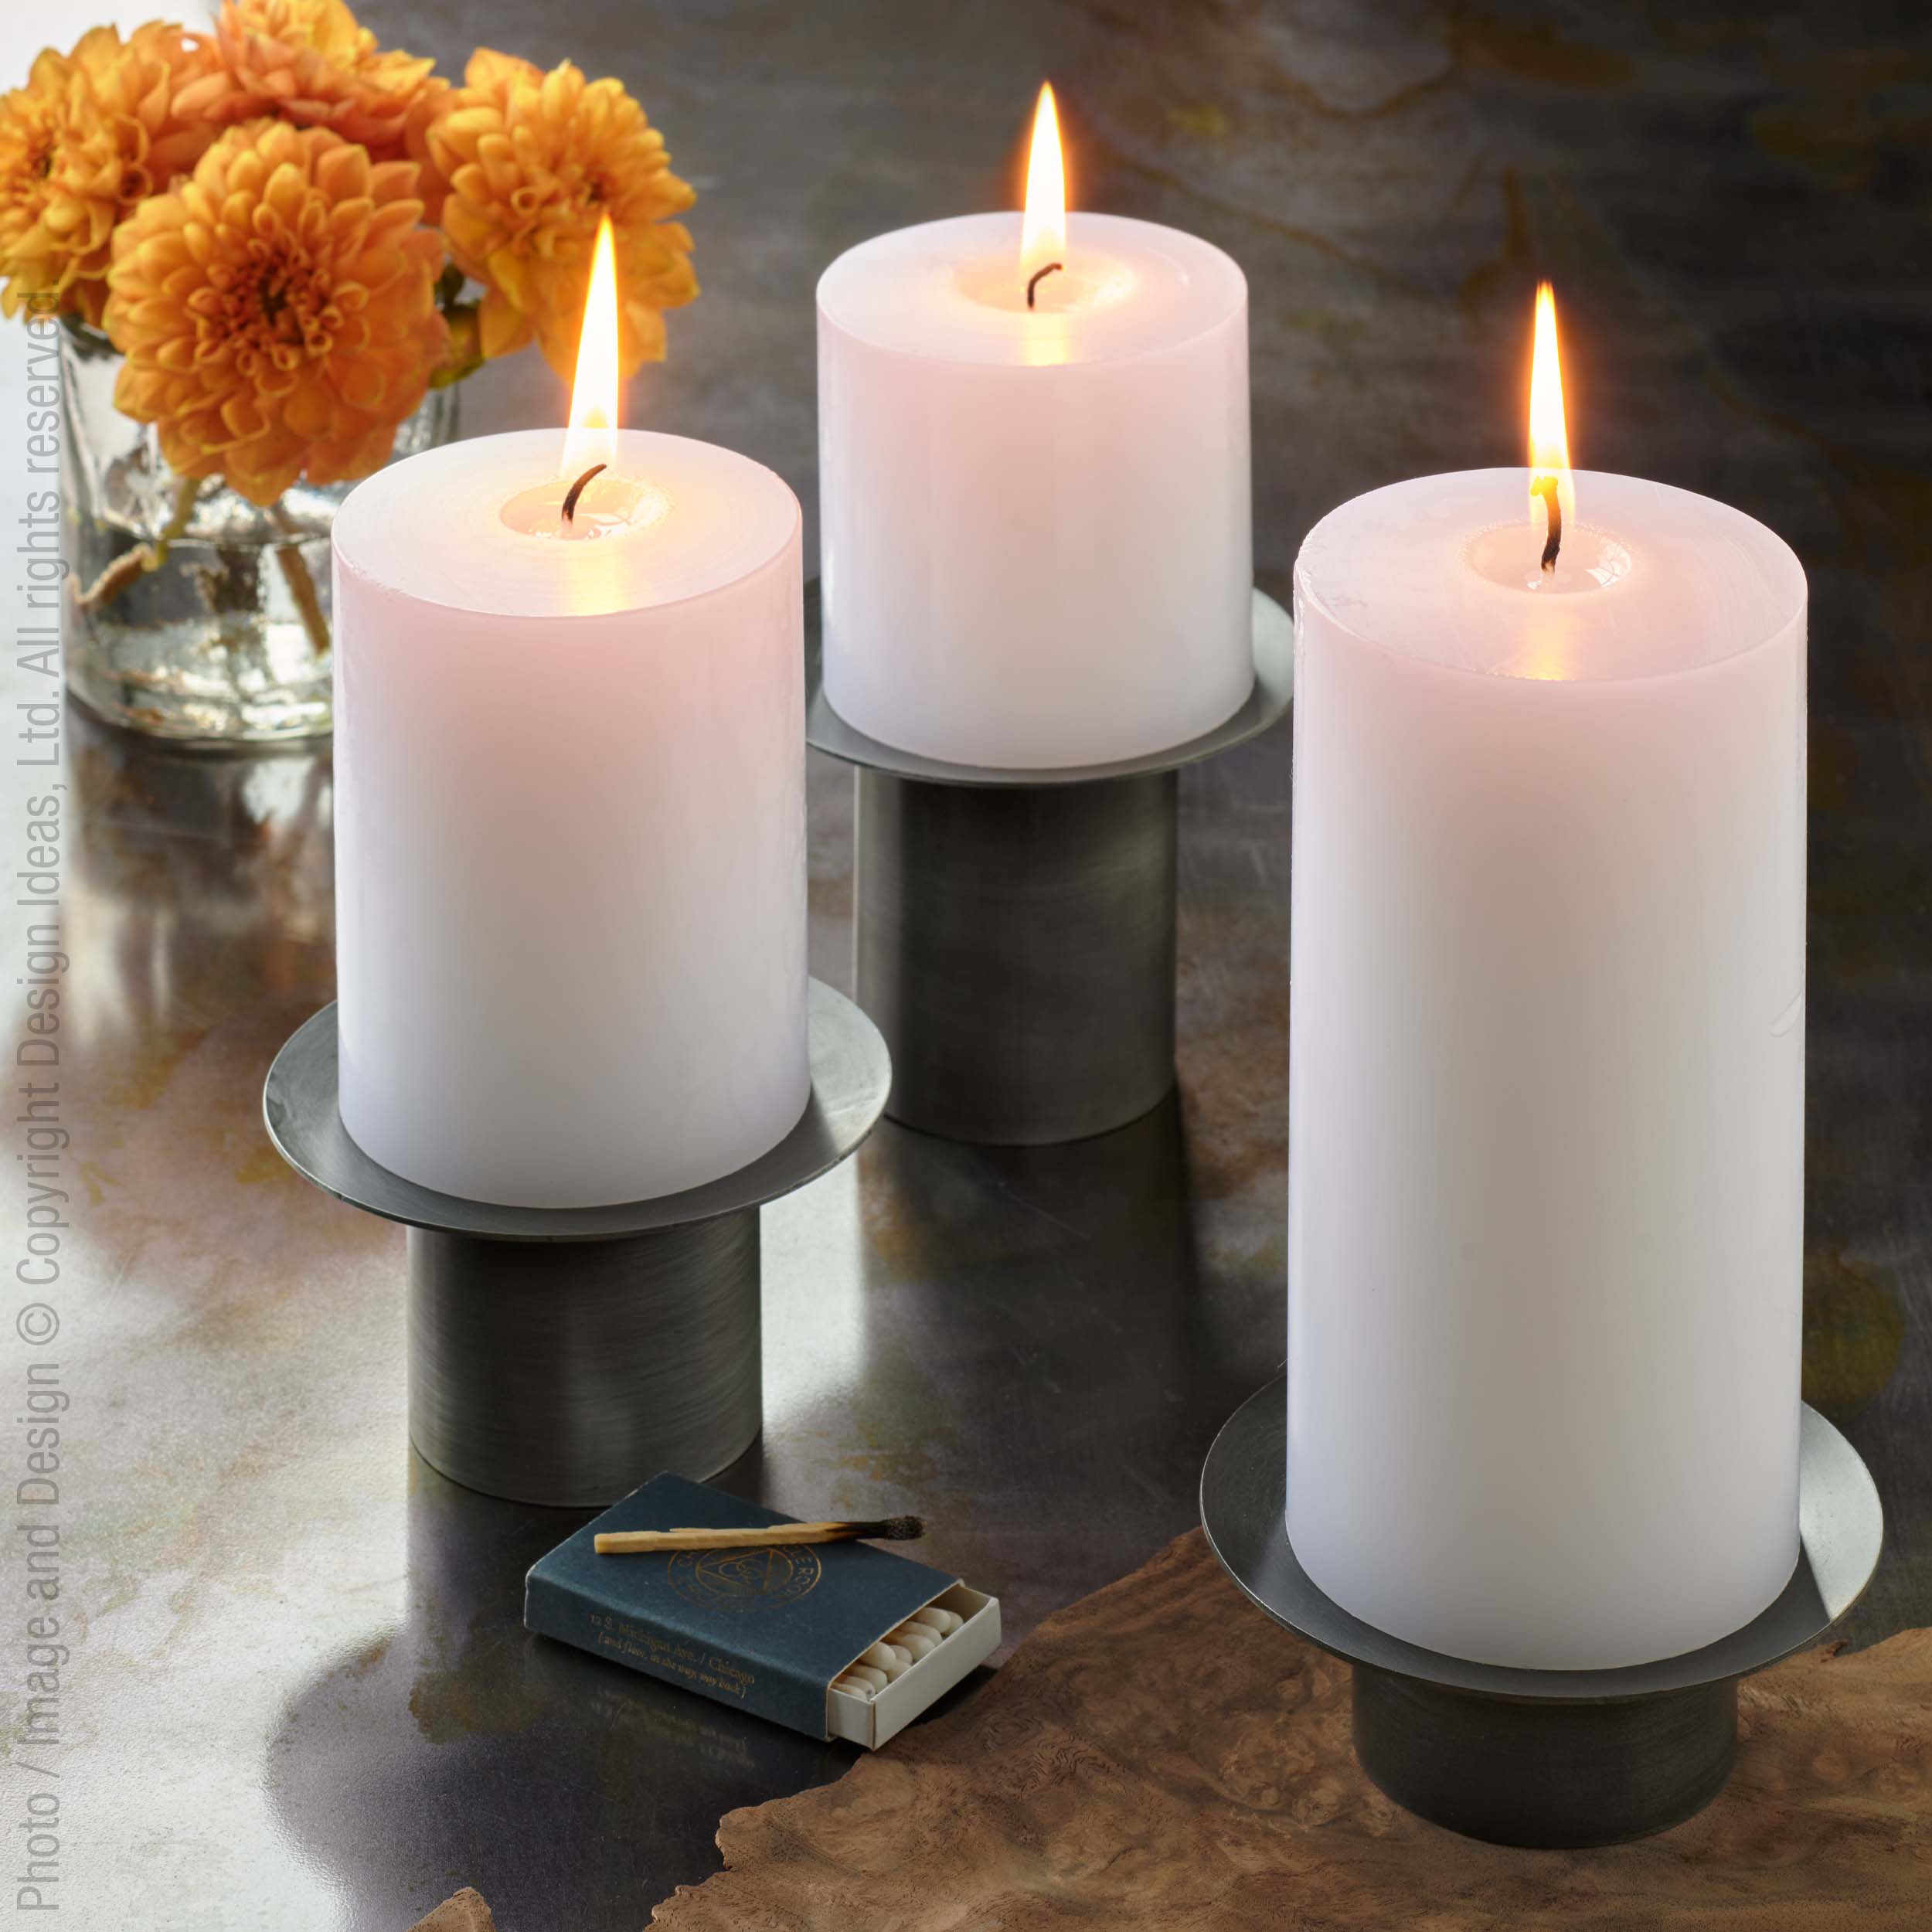 Rennik™ taper holder (1in) - Black | Image 1 | Premium Candleholder from the Rennik collection | made with Steel for long lasting use | texxture